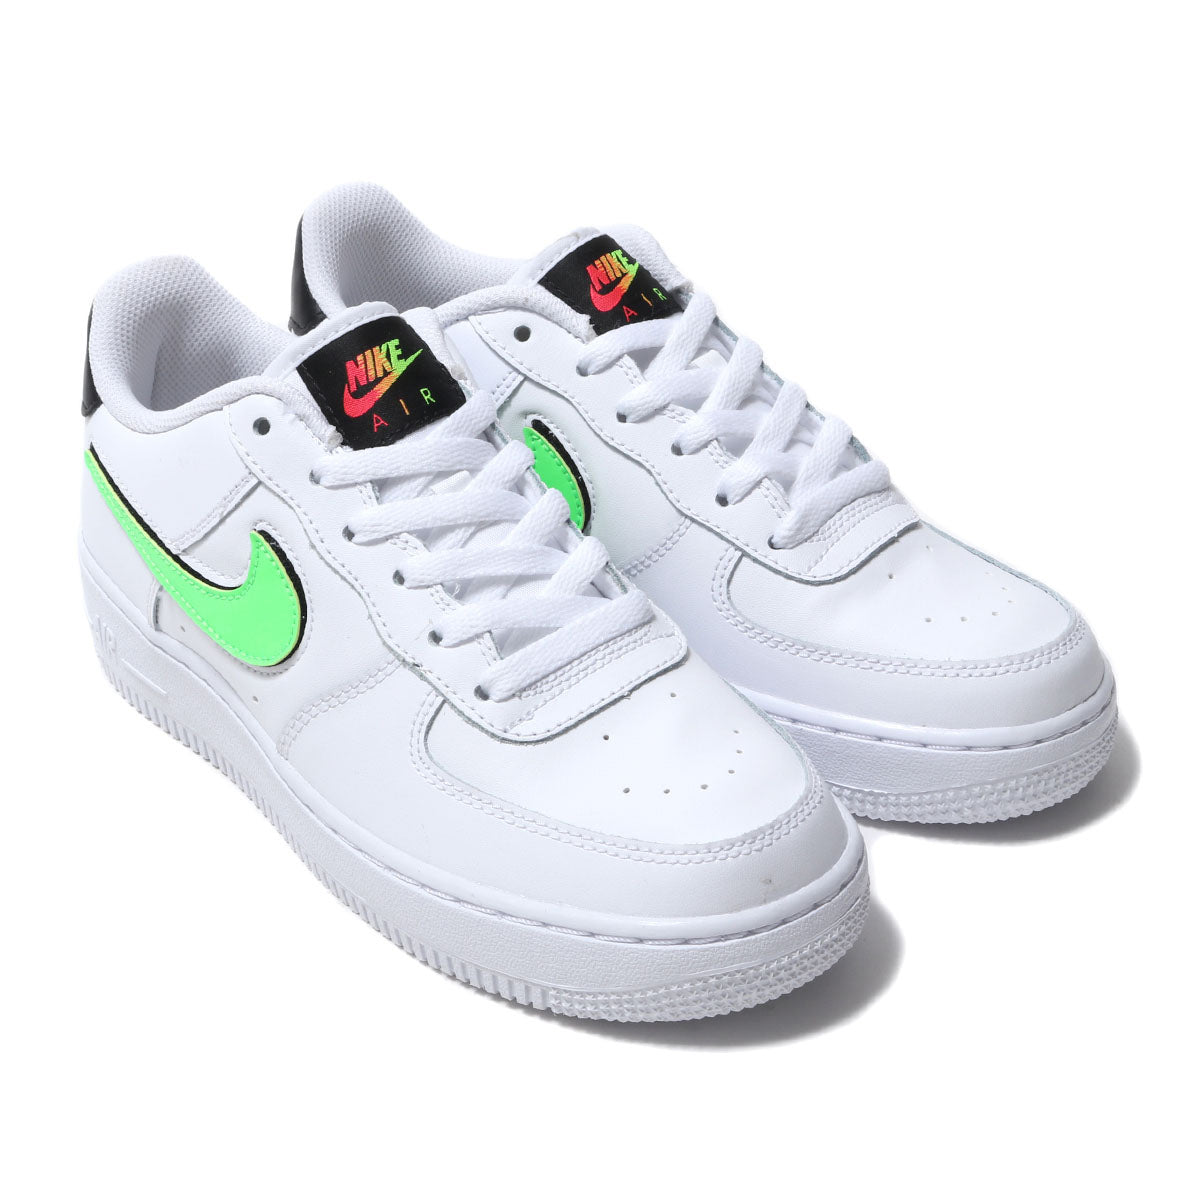 Nike Air Force 1 LV8 3 (GS) Shoes Size 4Y White/Black Strike Style AR7446  100